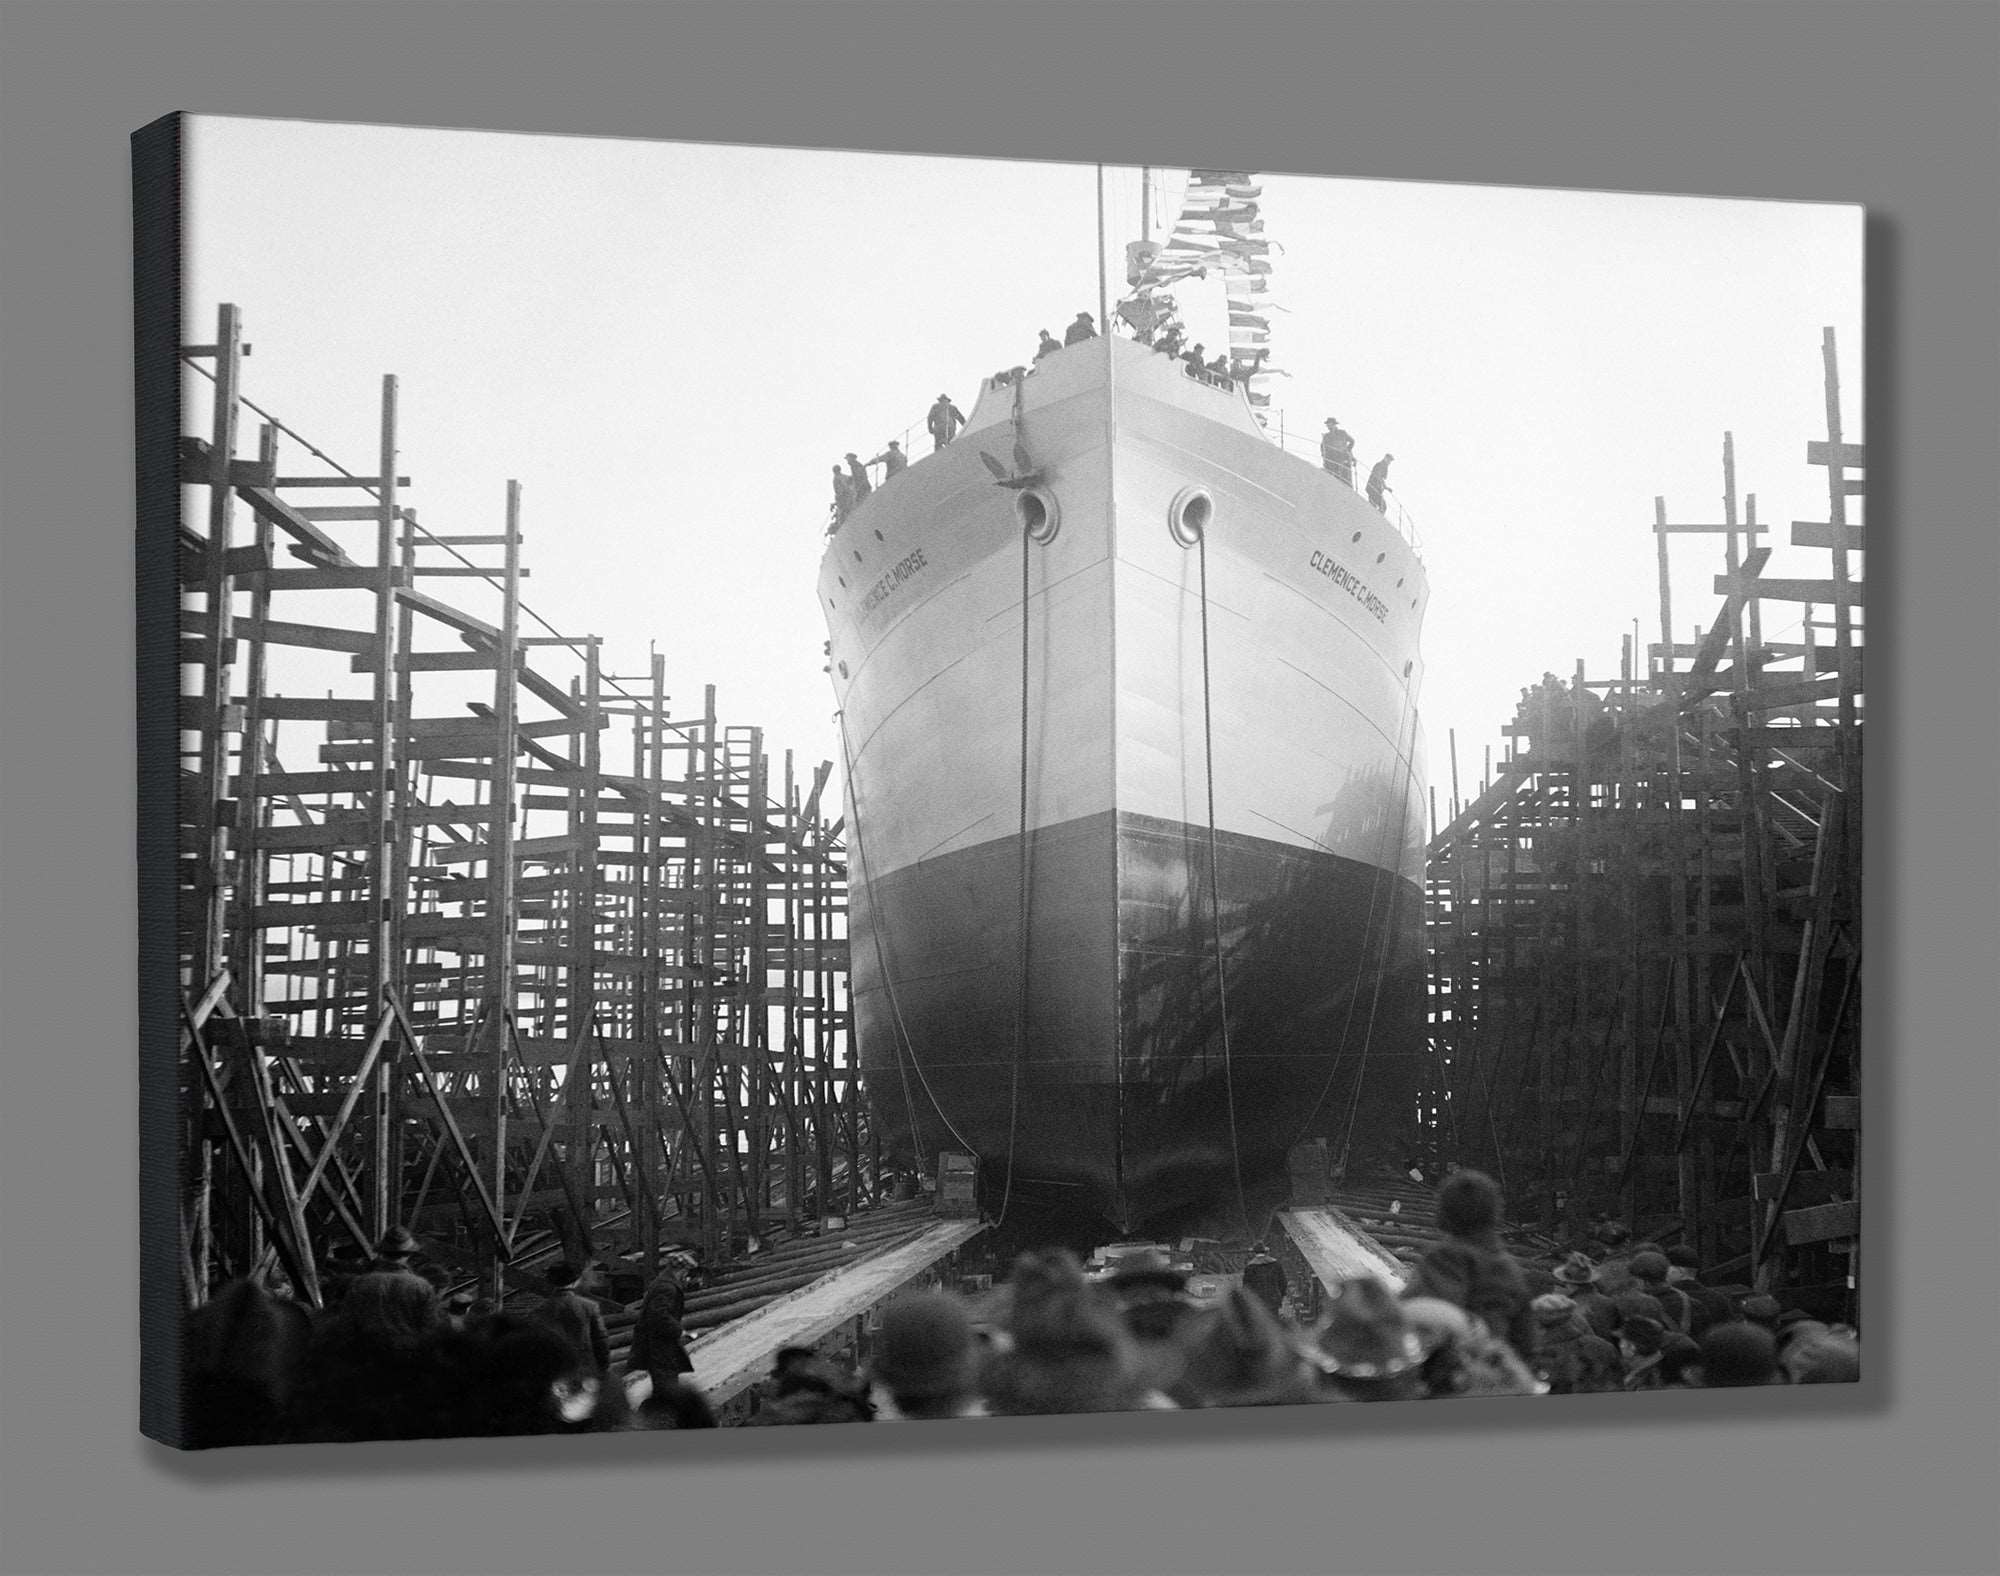 A canvas reproduction print of a vintage photograph of a ship launch in Virginia